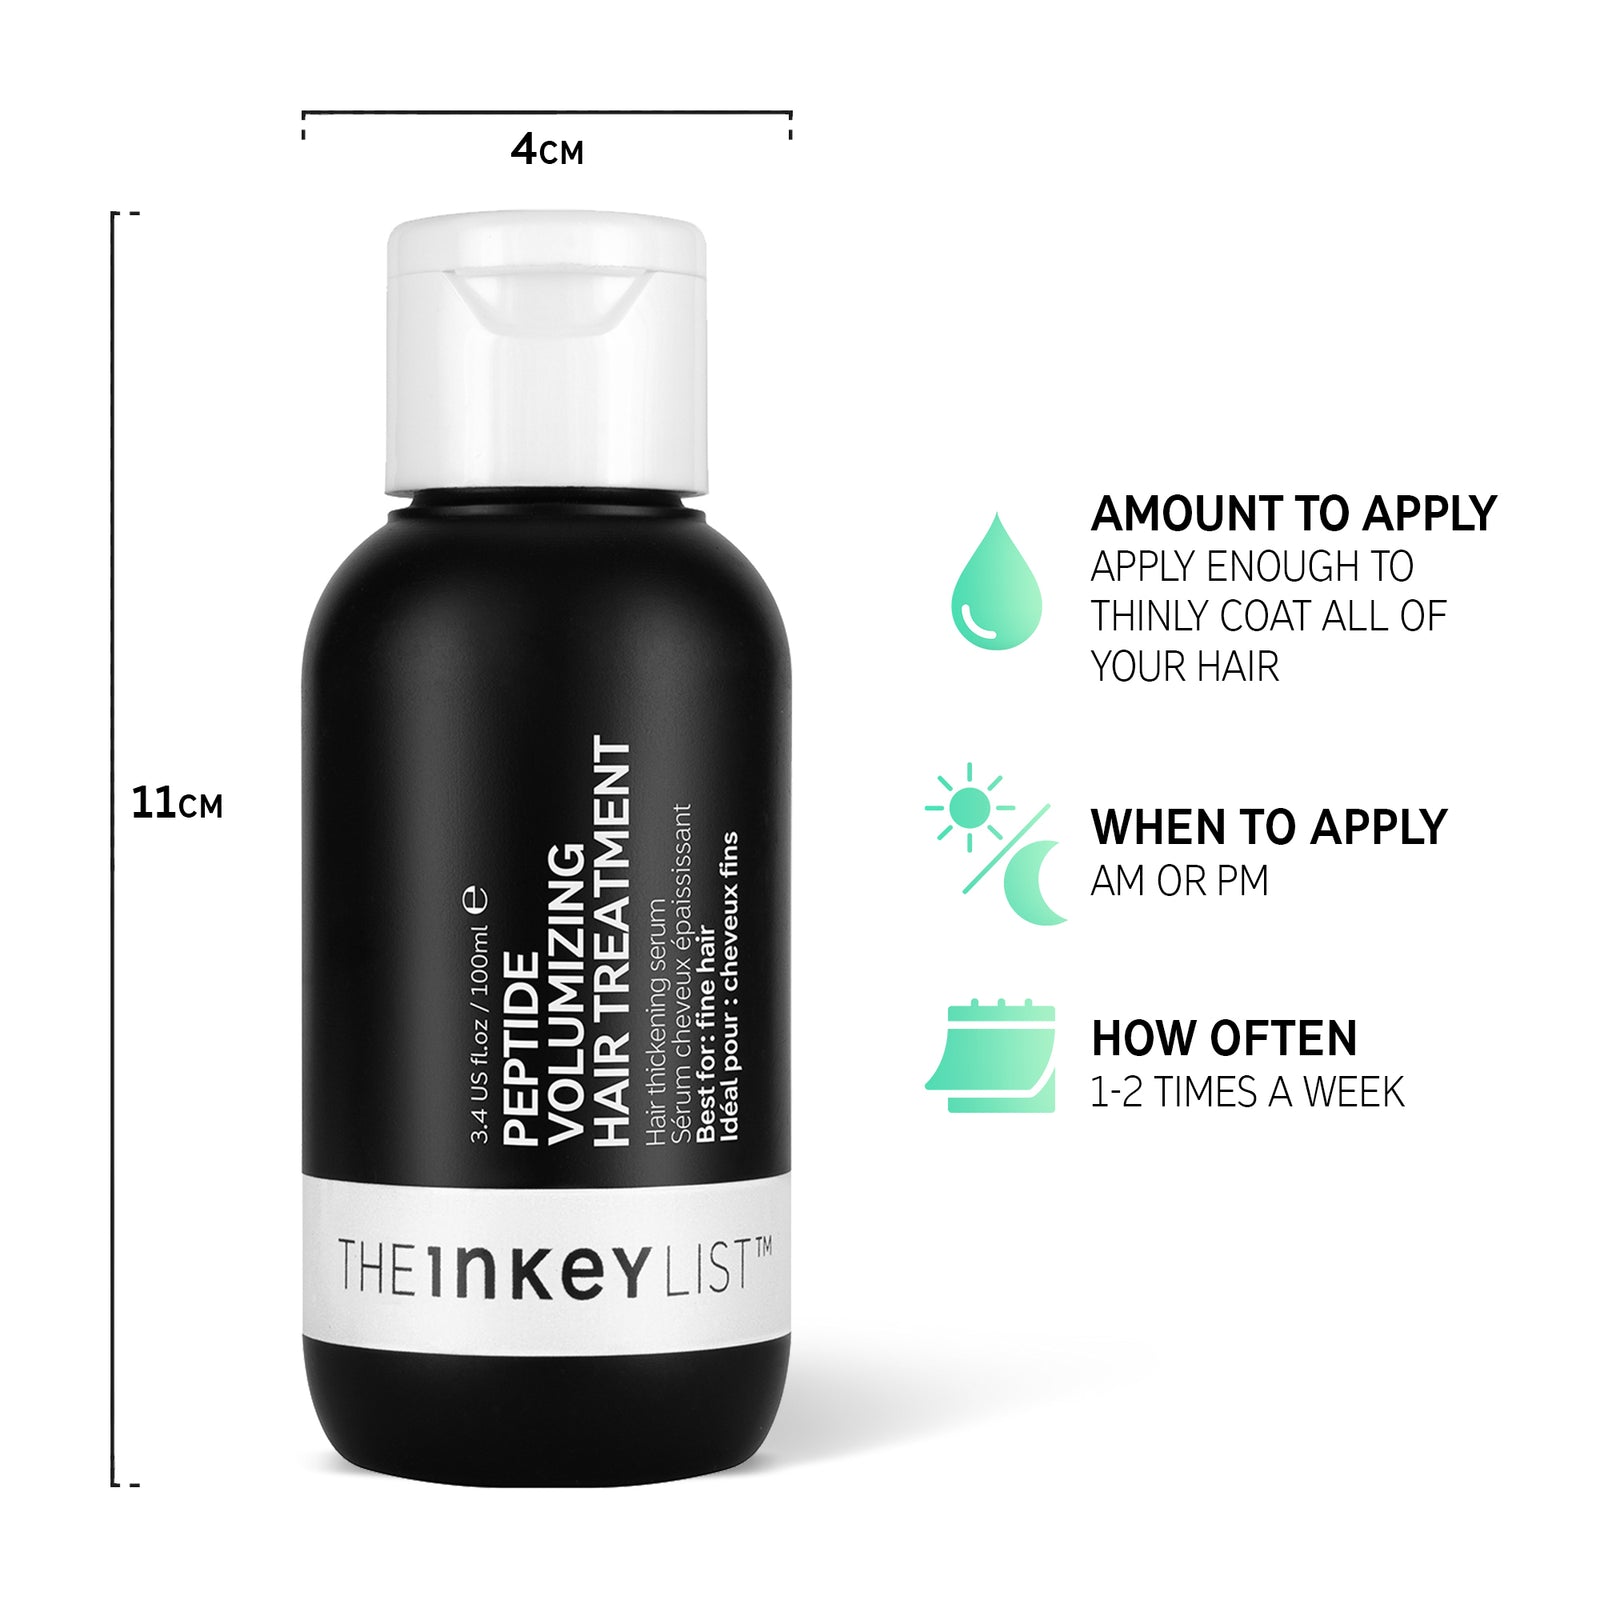 Hair Growth & Volume Duo Peptide hair bottle infographic with product usage description